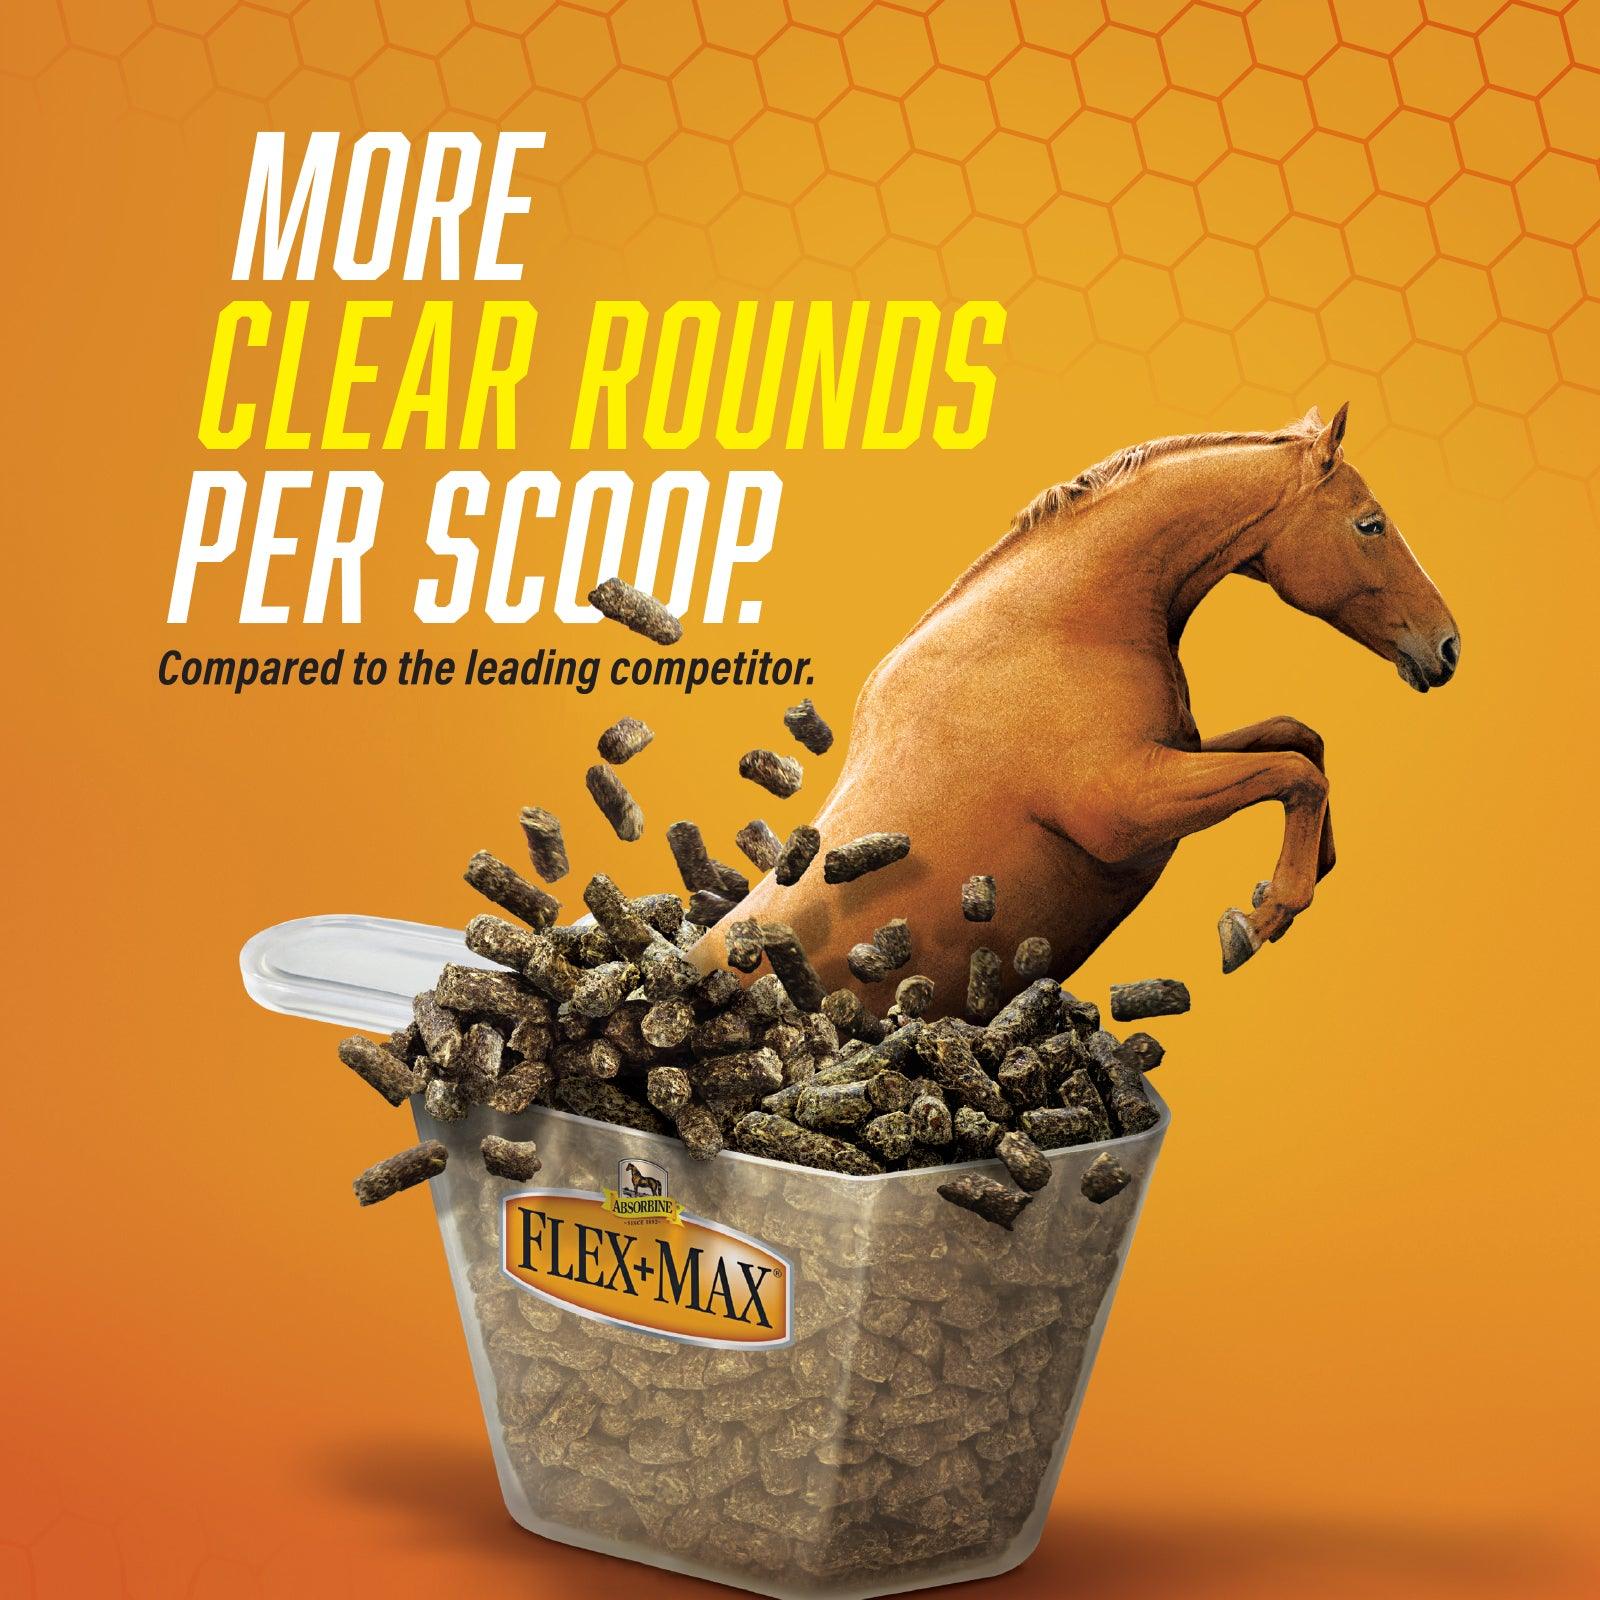 Horse jumping out of a massive sized scoop full of Flex + Max Joint Health supplement.  More clear rounds per scoop, compared to the leading competitor.